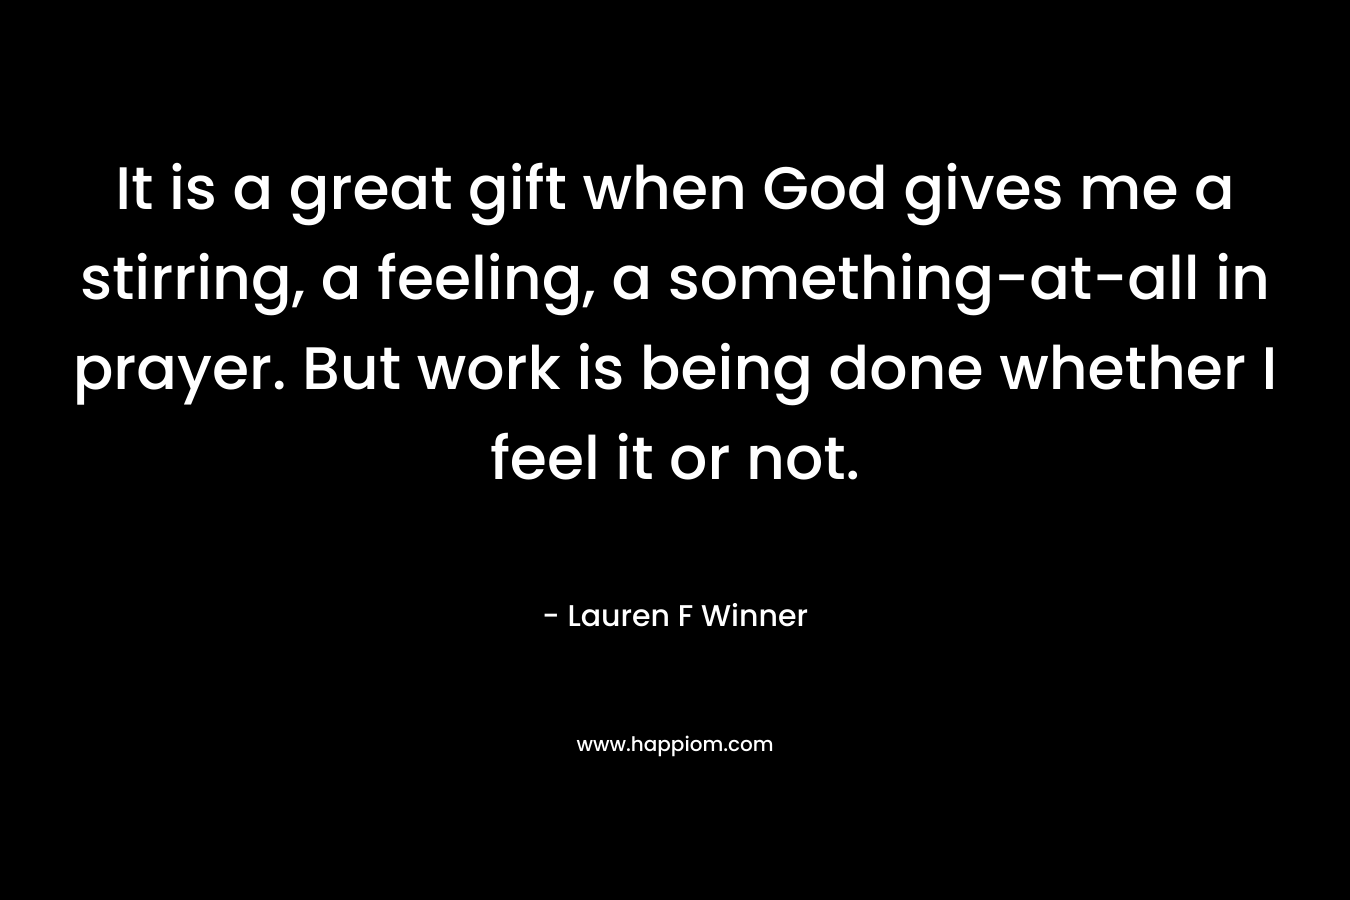 It is a great gift when God gives me a stirring, a feeling, a something-at-all in prayer. But work is being done whether I feel it or not. – Lauren F Winner